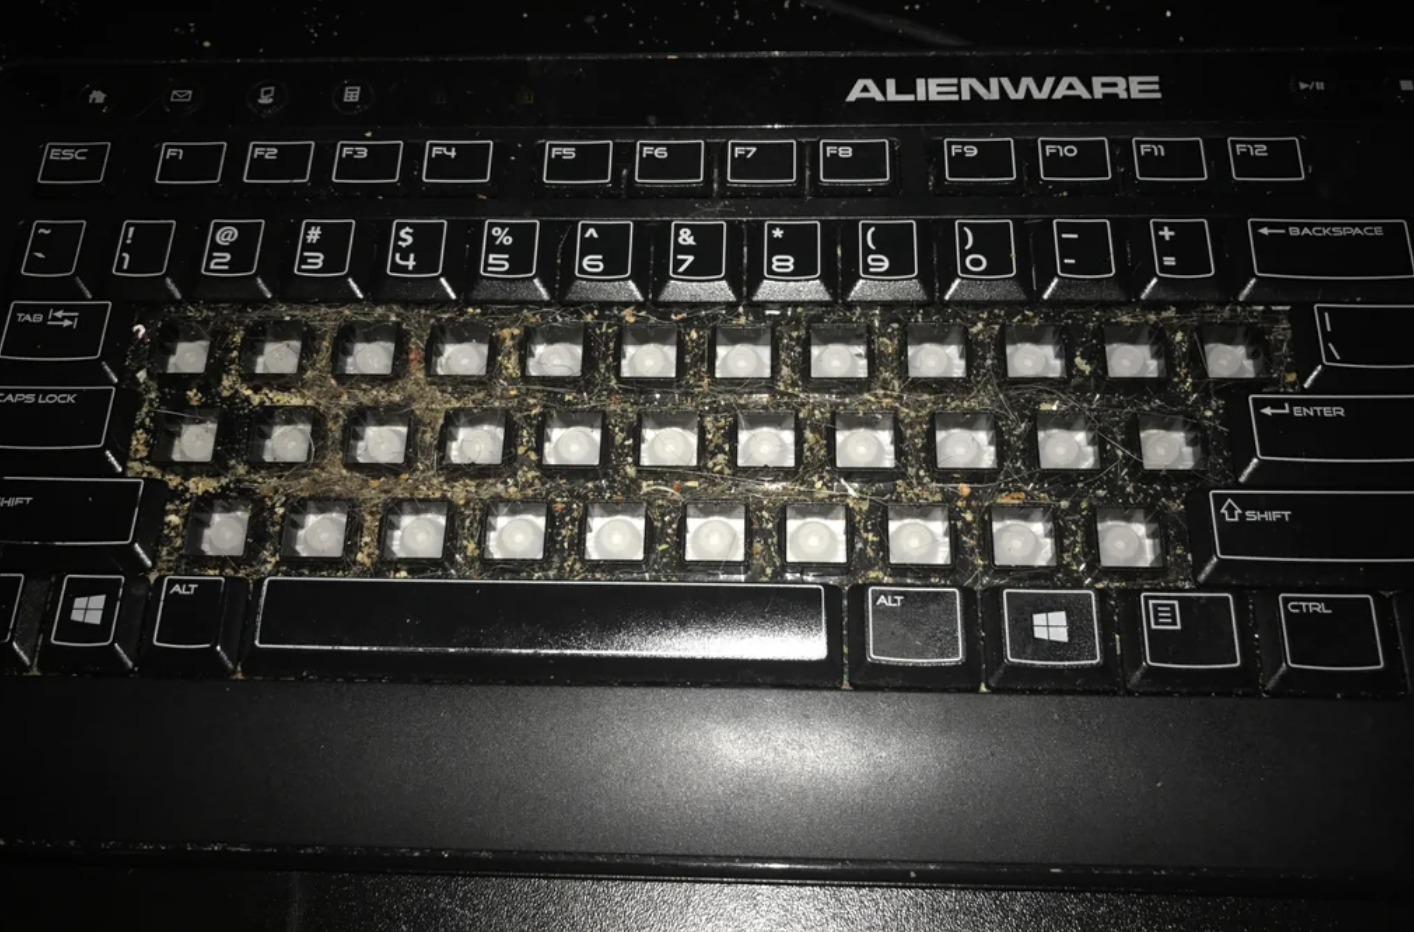 A very dirty computer keyboard with missing keys